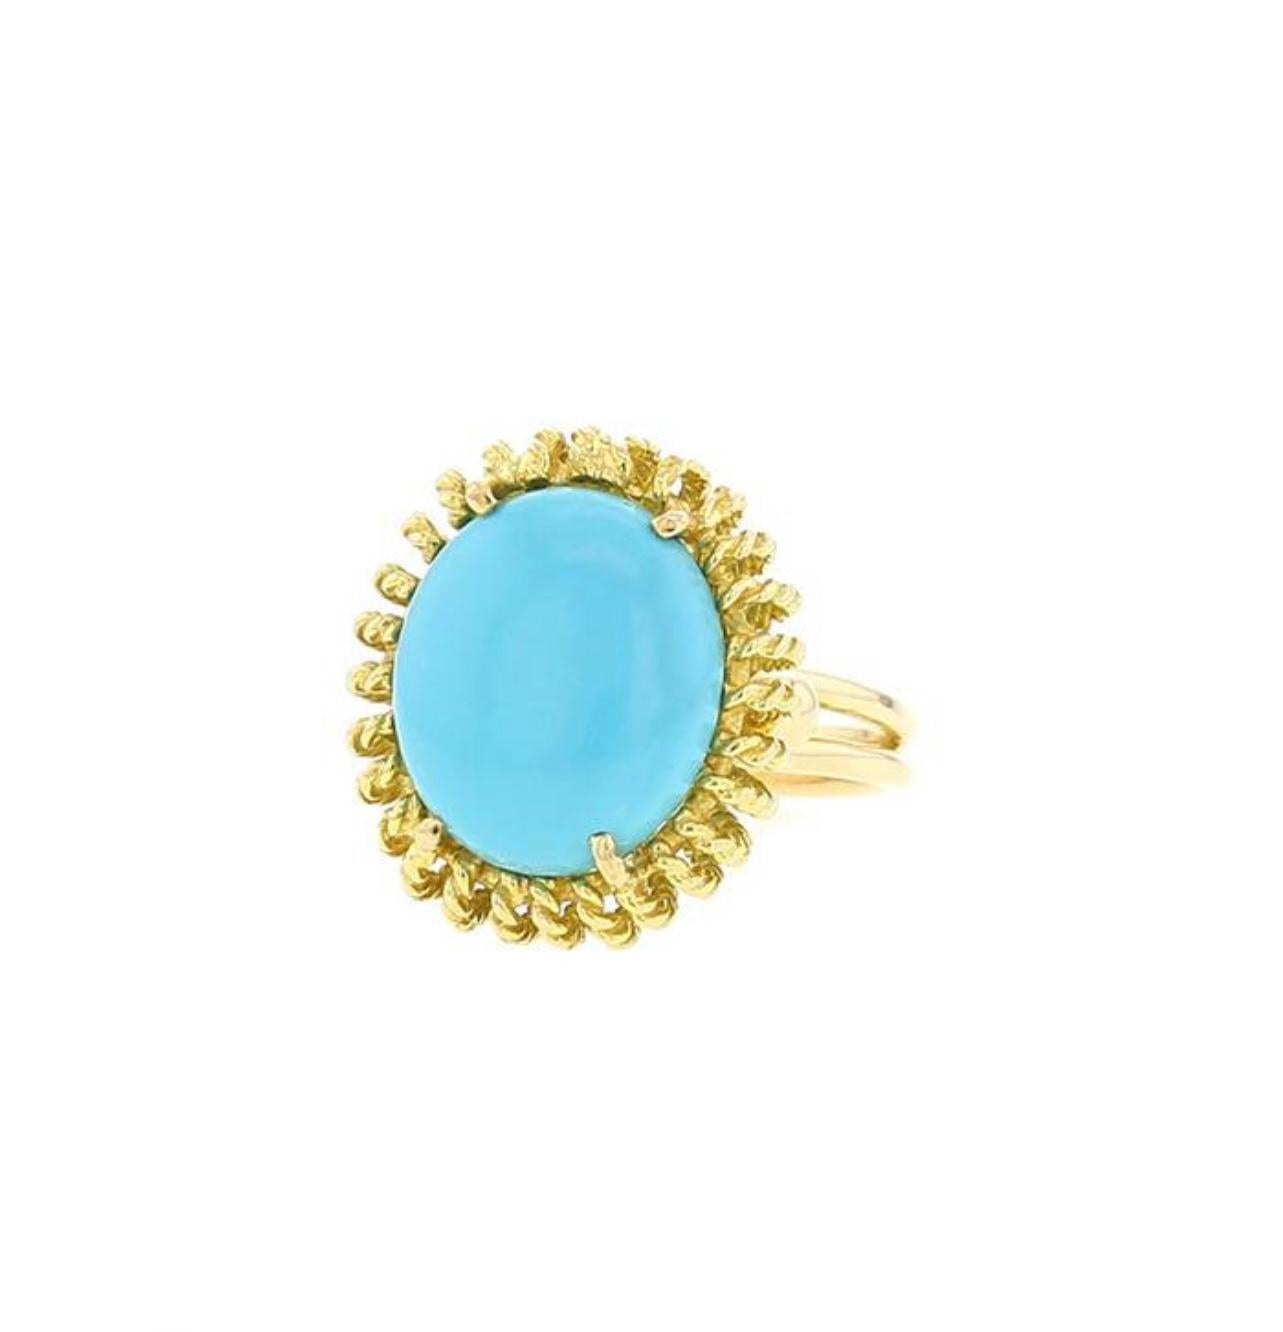 A vintage yellow gold sea urchin shaped ring with a turquoise cabochon in the centre and twisted strands on the setting. Very nice twisted thread work on the basin.

Estimated weight of the turquoise : 4.75 Carats

Dimensions: 16.57 x 18.85 x 11.95